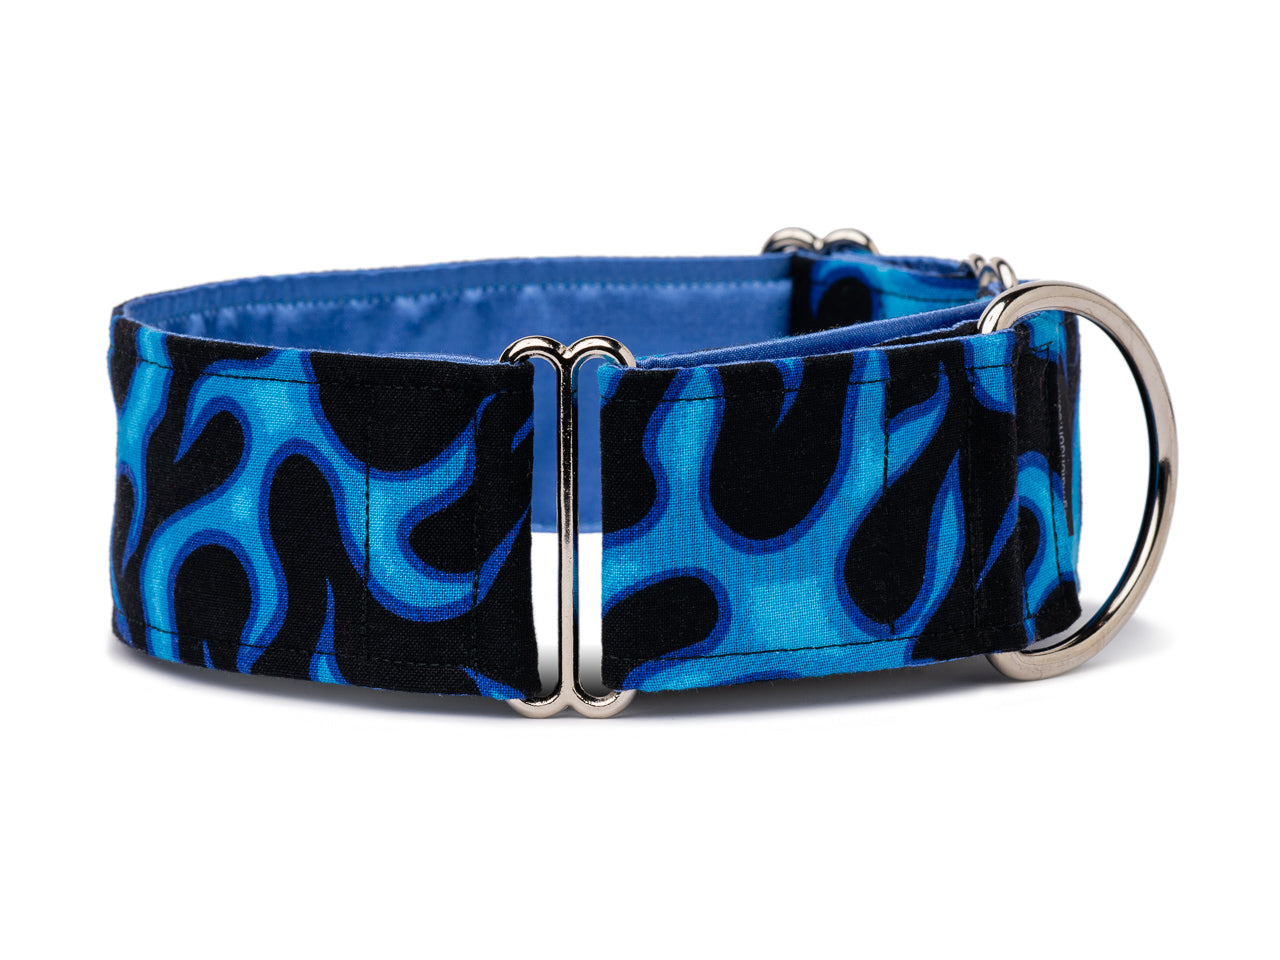 Sizzling blue flames on black will highlight your pup's bright personality and feisty attitude!